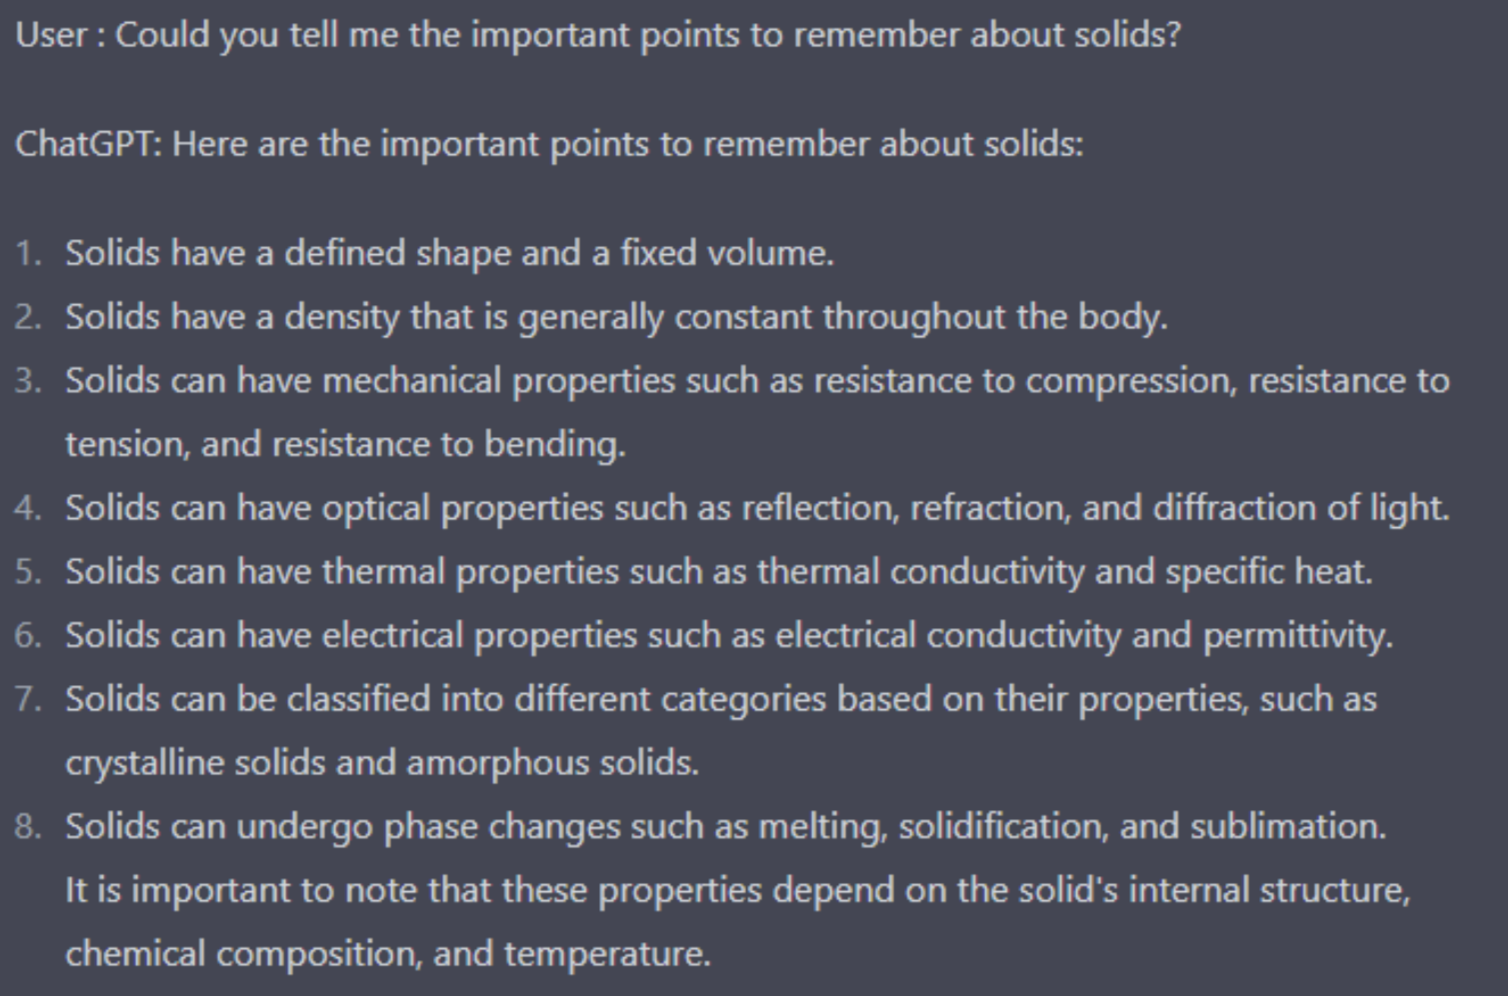 Screenshot of a conversation with ChatGPT. I ask: “Could you tell me the important points to remember about solids?” ChatGPT answers: “Here are the important points to remember about solids: 1. Solids have a defined shape and a fixed volume. 2. Solids have a density that is generally constant throughout the body. 3. Solids can have mechanical properties such as resistance to compression, resistance to tension, and resistance to bending. 4. Solids can have optical properties such as reflection, refraction, and diffraction of light. 5. Solids can have thermal properties such as thermal conductivity and specific heat. 5. Solids can have electrical properties such as electrical conductivity and permittivity. 6. Solids can be classified into different categories based on their properties, such as crystalline solids and amorphous solids. 7. Solids can undergo phase changes such as melting, solidification, and sublimation. 8. It is important to note that these properties depend on the solid's internal structure, chemical composition, and temperature.” 